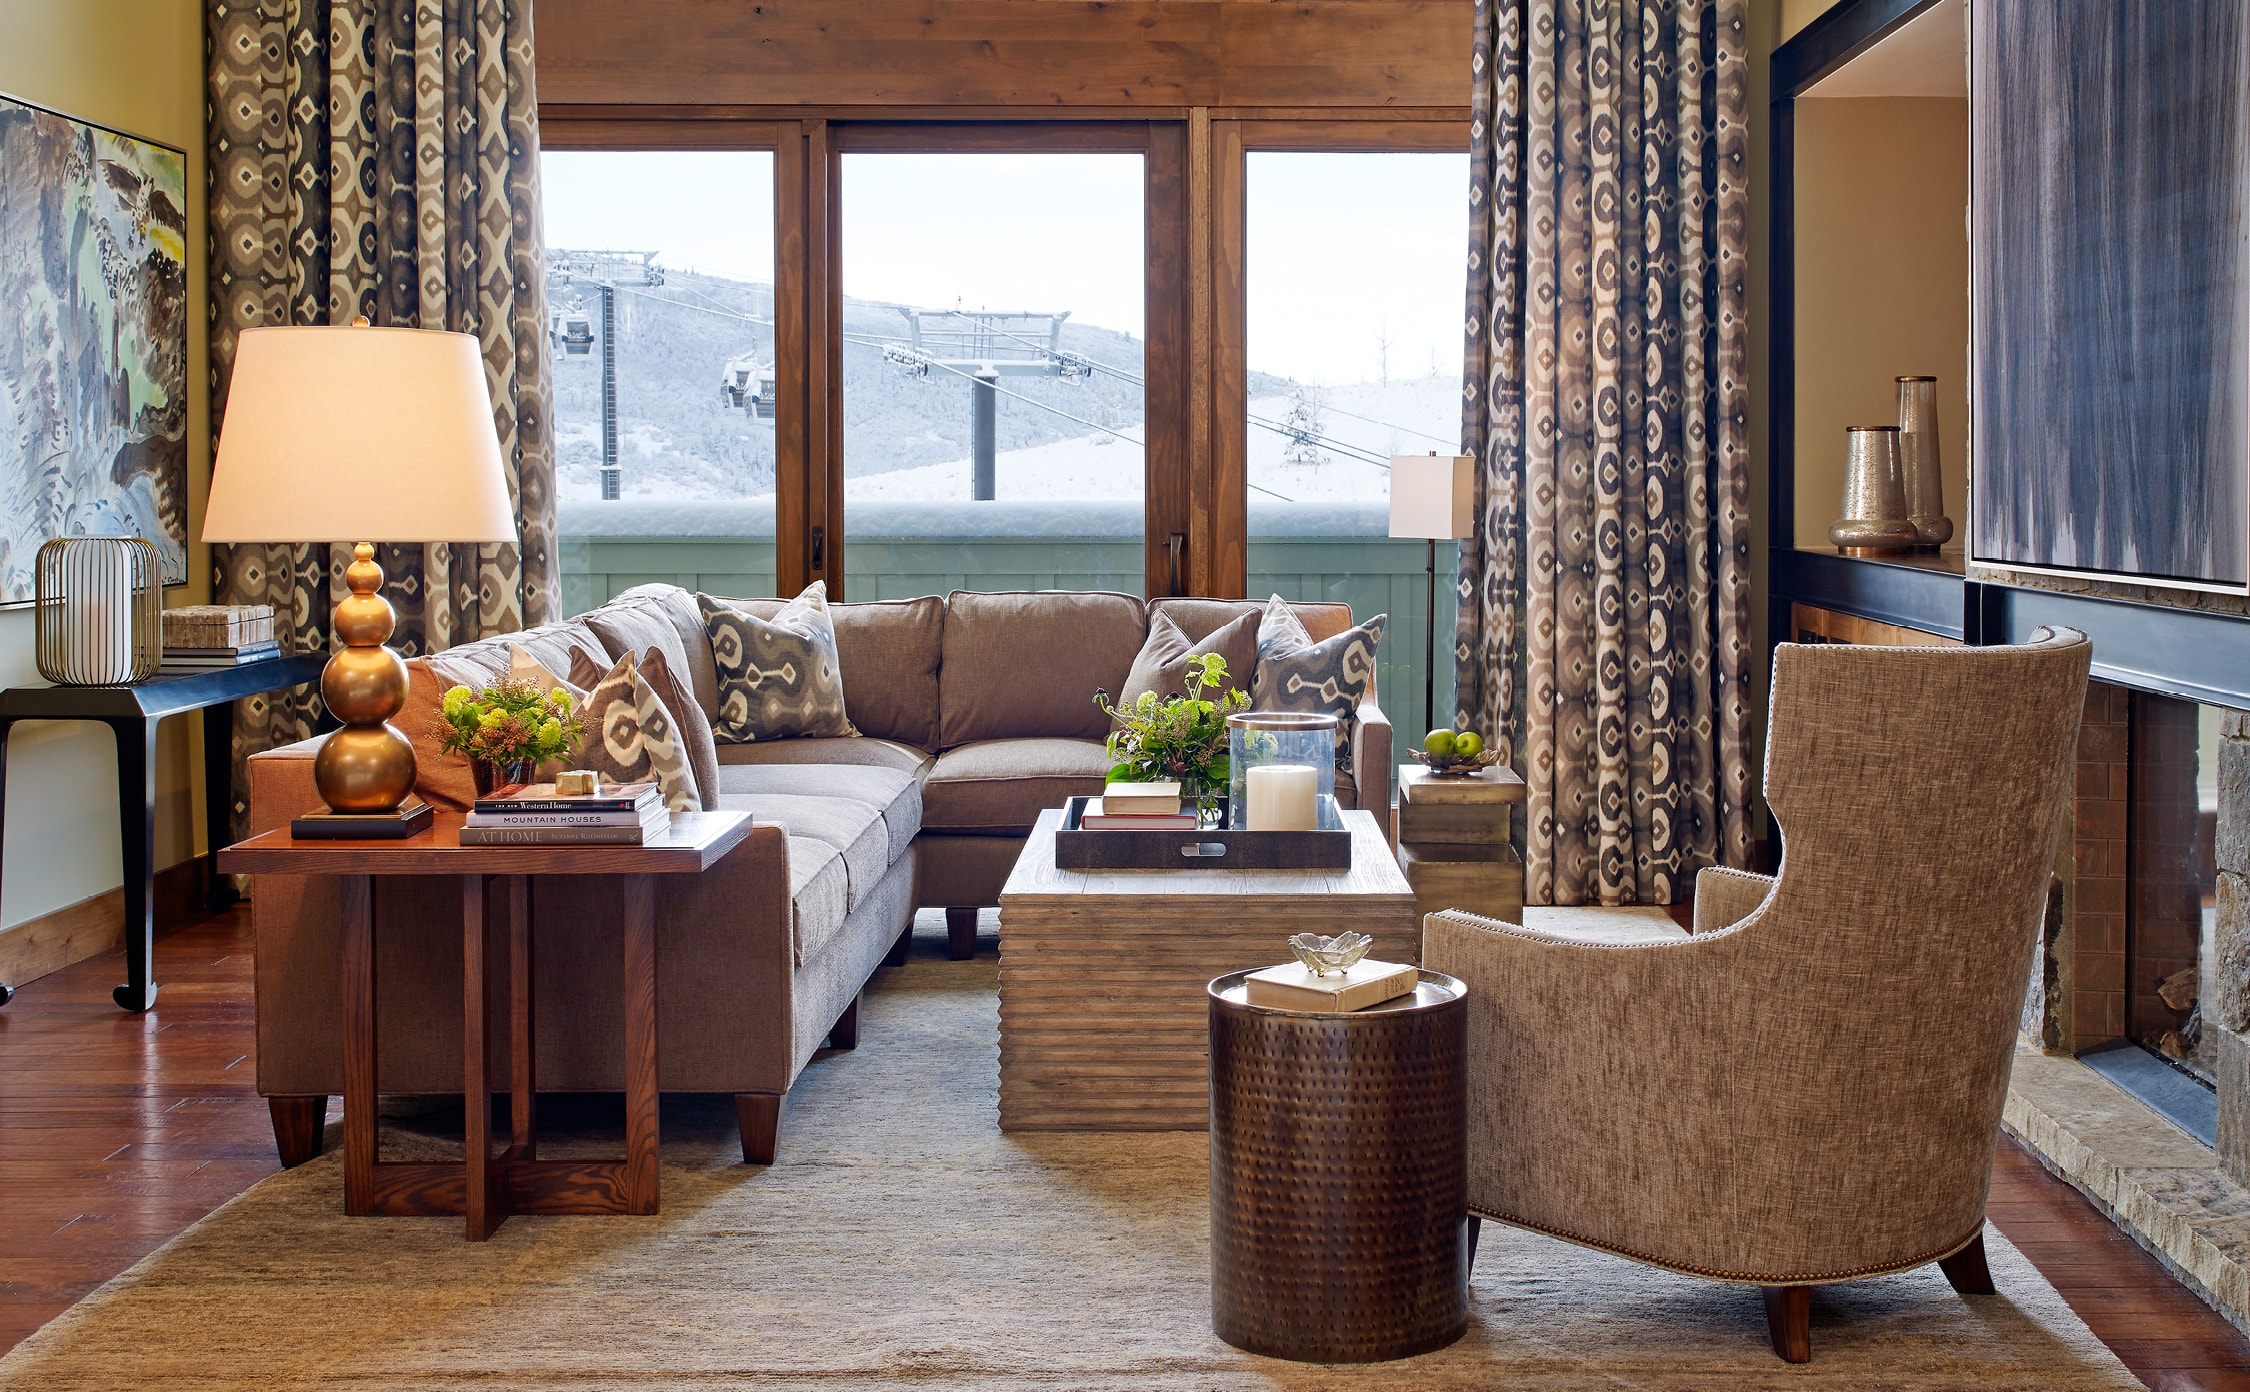 steamboat springs designer living spaces like this living room by j banks design offer incredible views